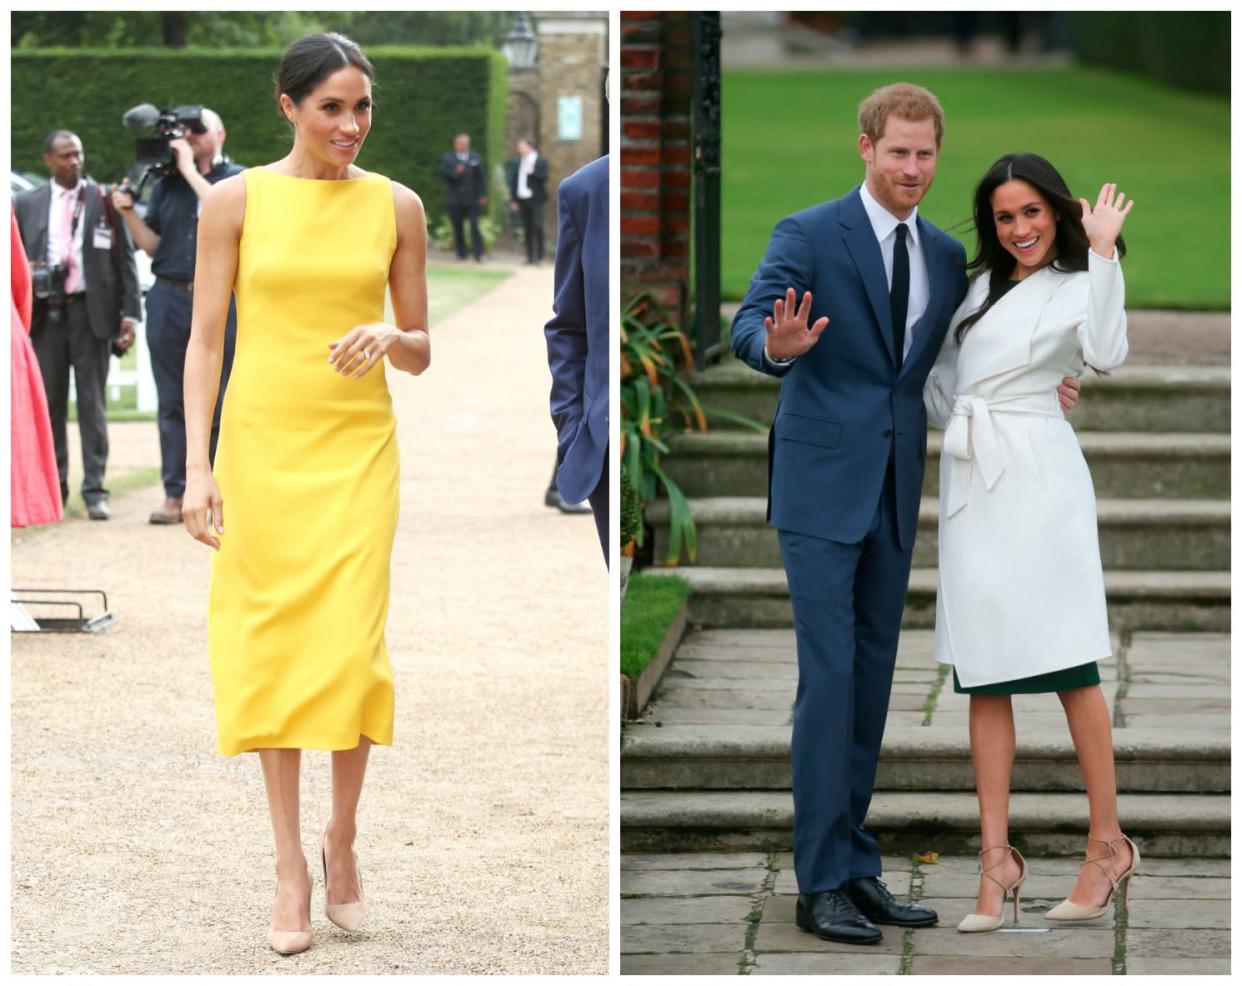 Meghan Markle is a repeat-rule breaker when it comes to baring her legs without stockings. Source: Getty